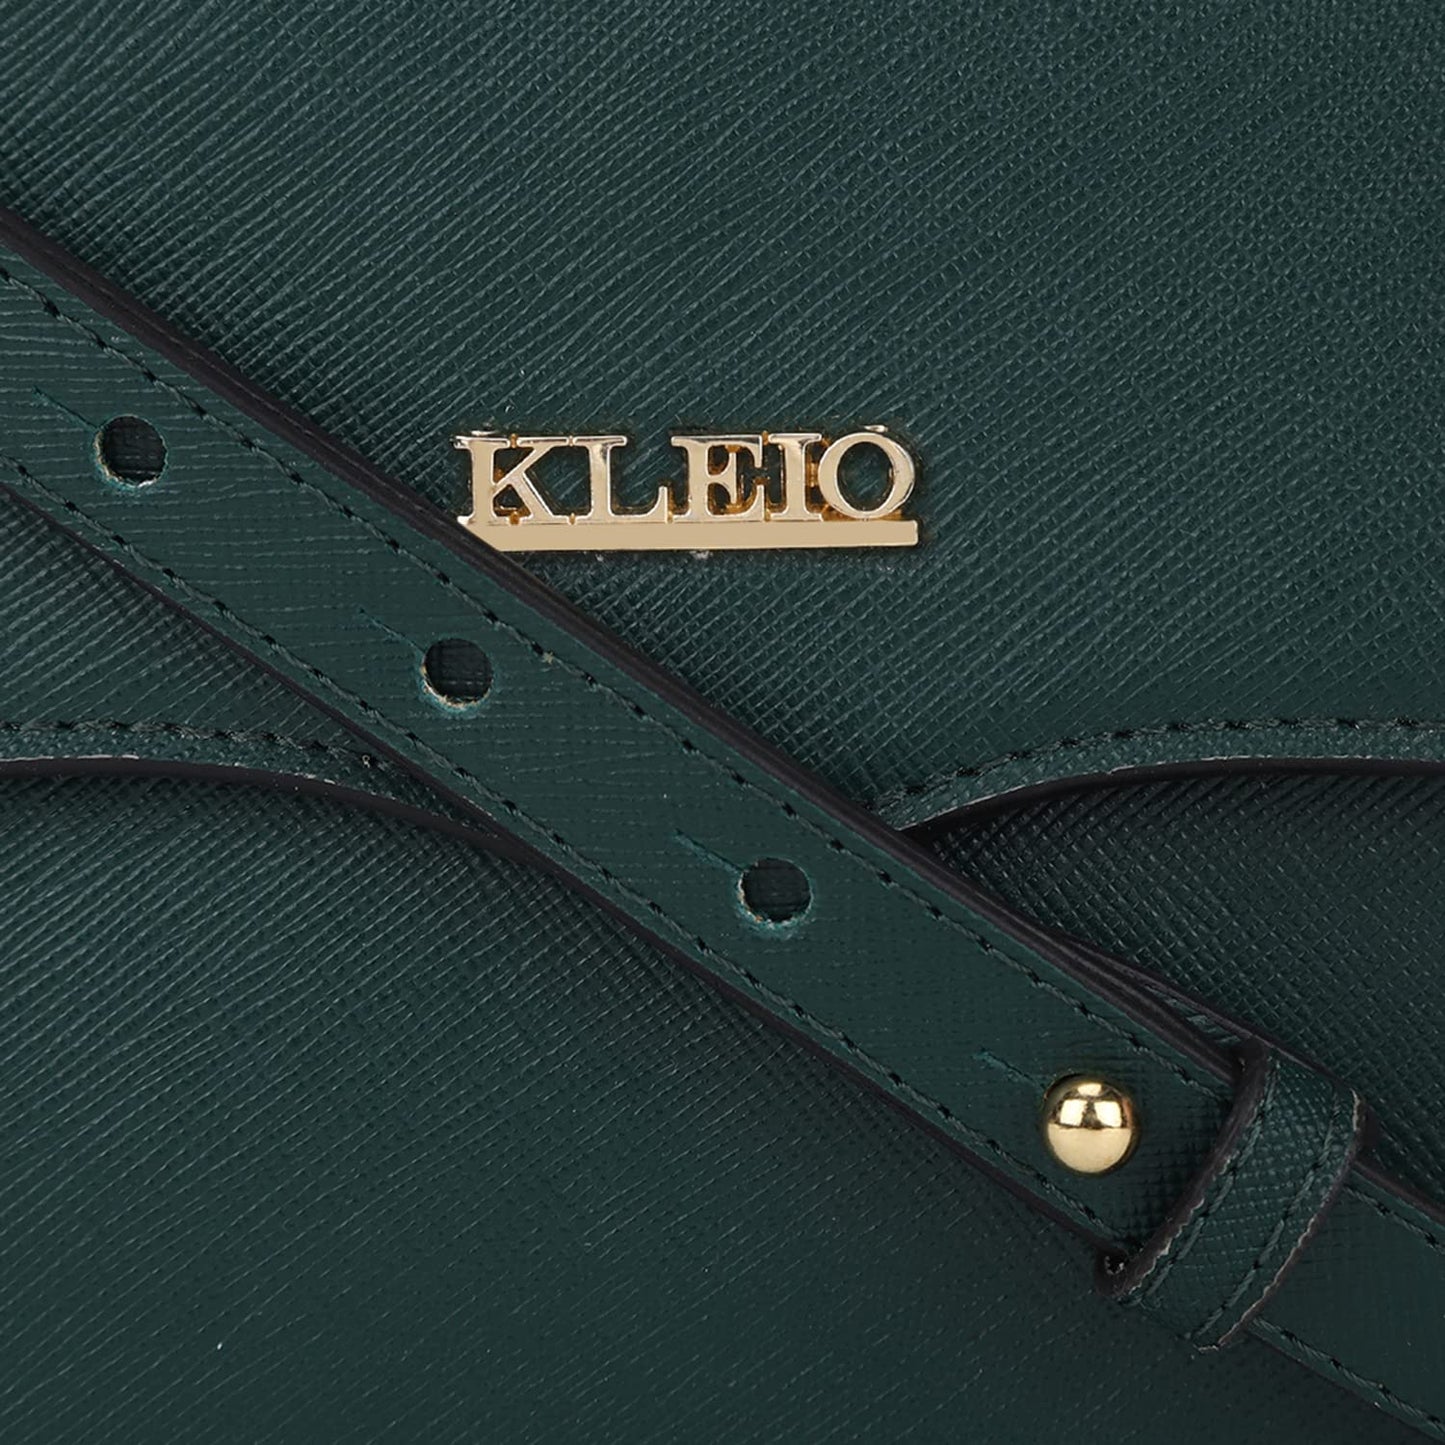 KLEIO Textured Leather Mini Handbag for Women (Dark Green) with Top Handle & Polyester Lining | Elegant Crossbody Bag for Girls with Adjustable & Detachable Sling Strap